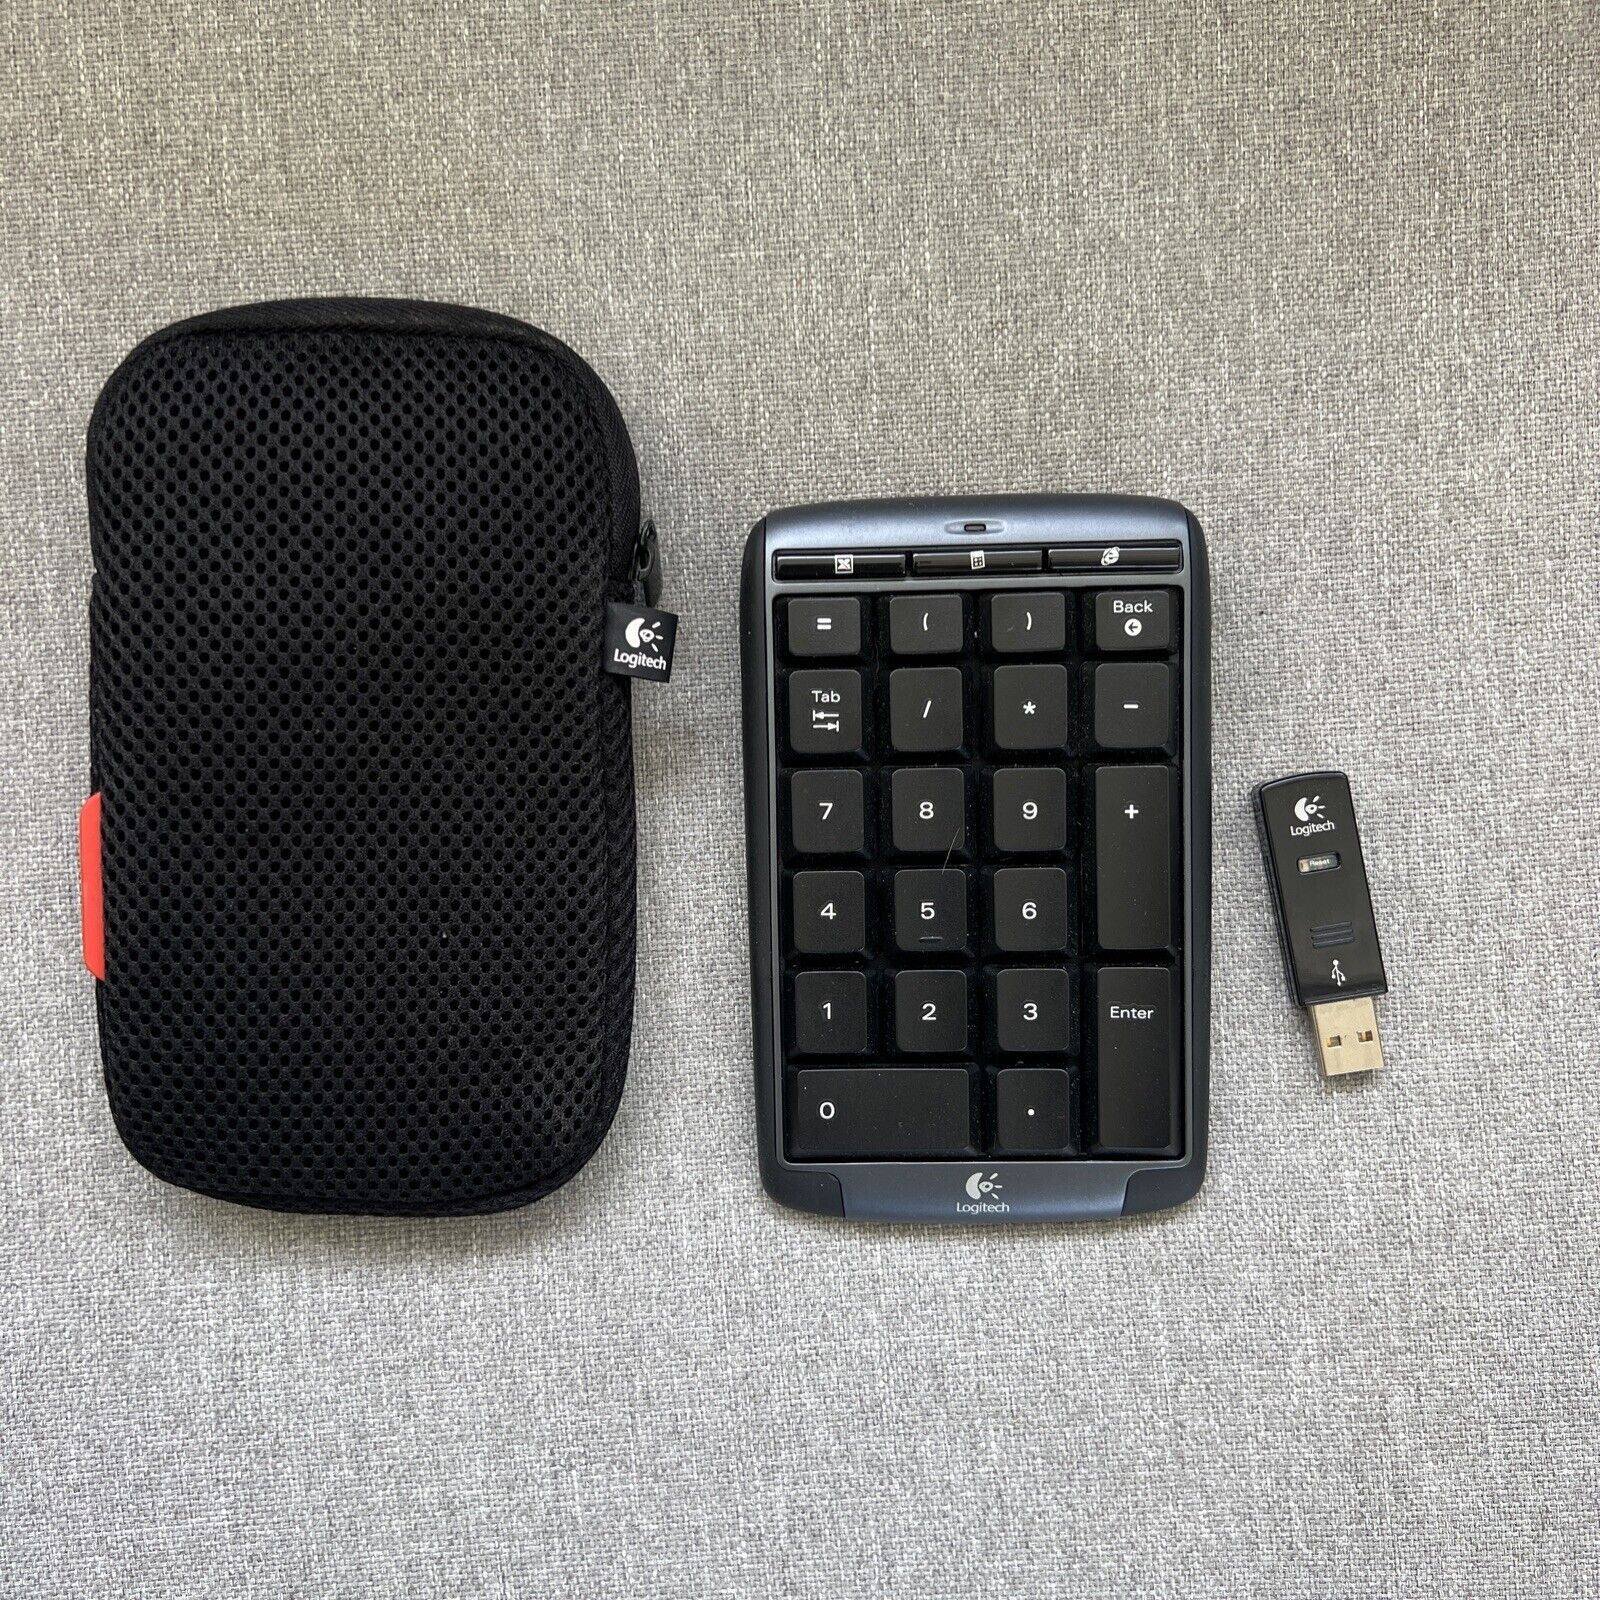 Logitech N305 Wireless Number Key Pad Dongle Case Tested Working